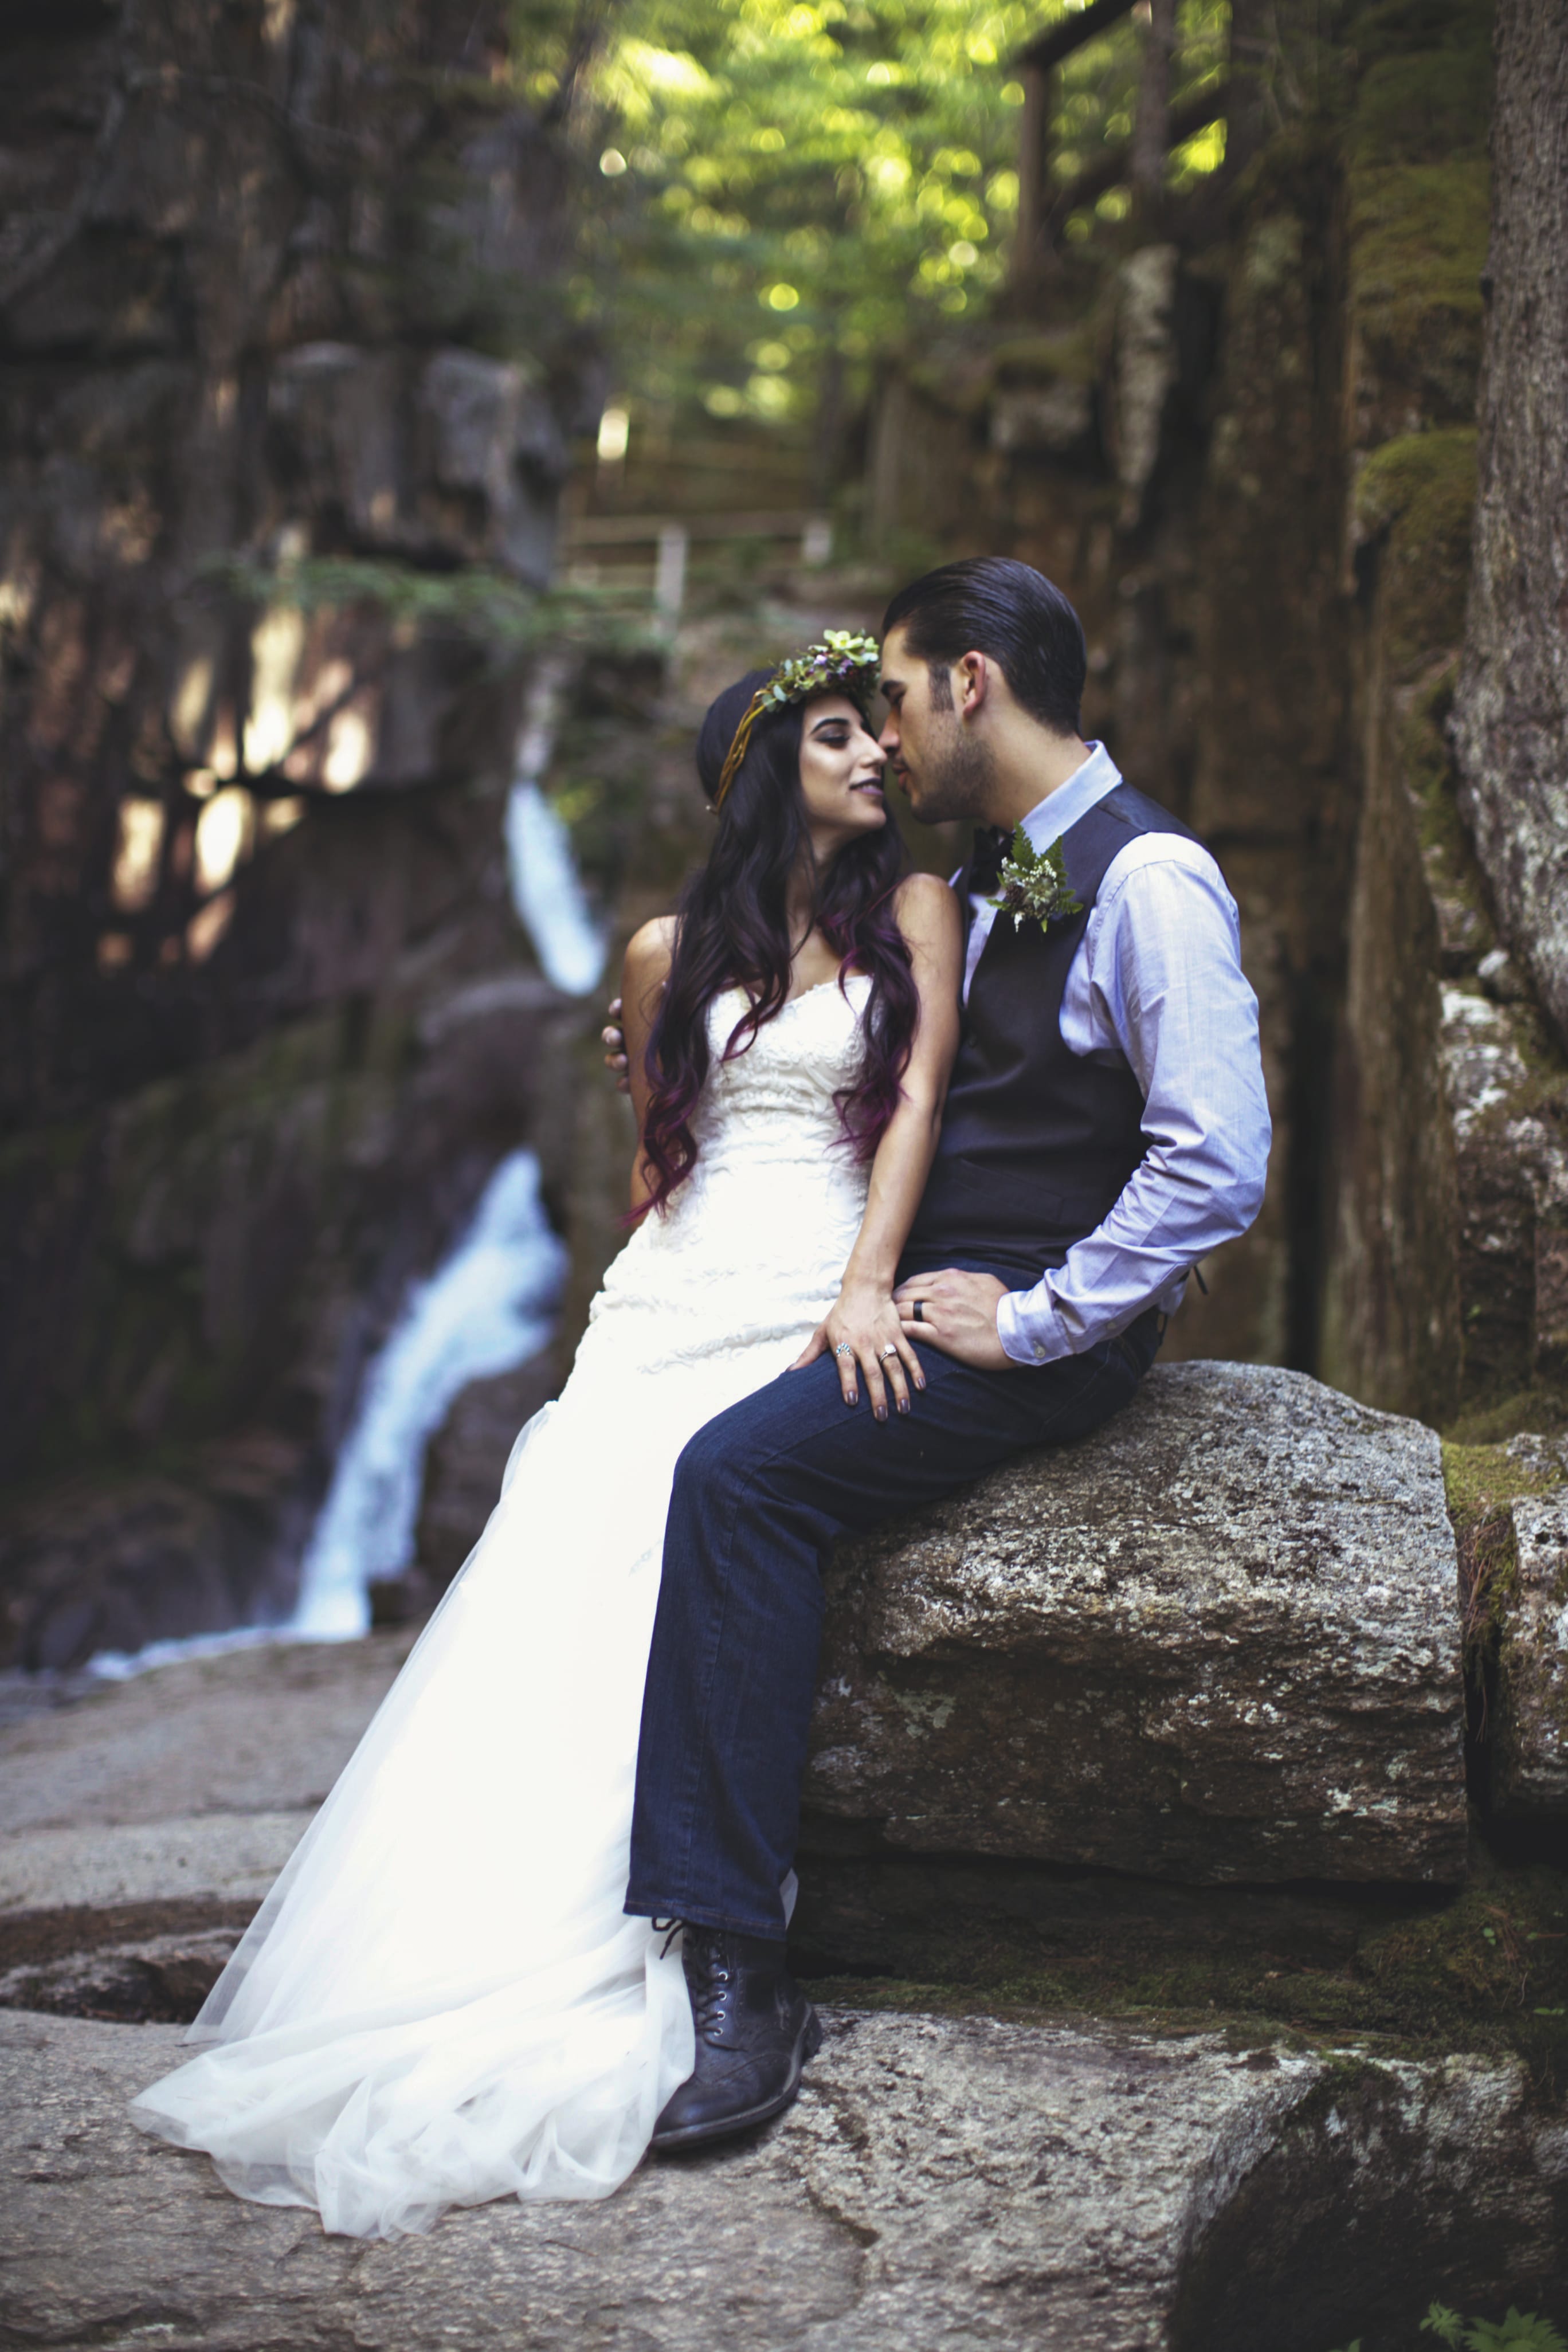 High School Sweethearts Marry in Enchanted Forest! - Maggie Bride wearing Azura wedding dress by Maggie Sottero